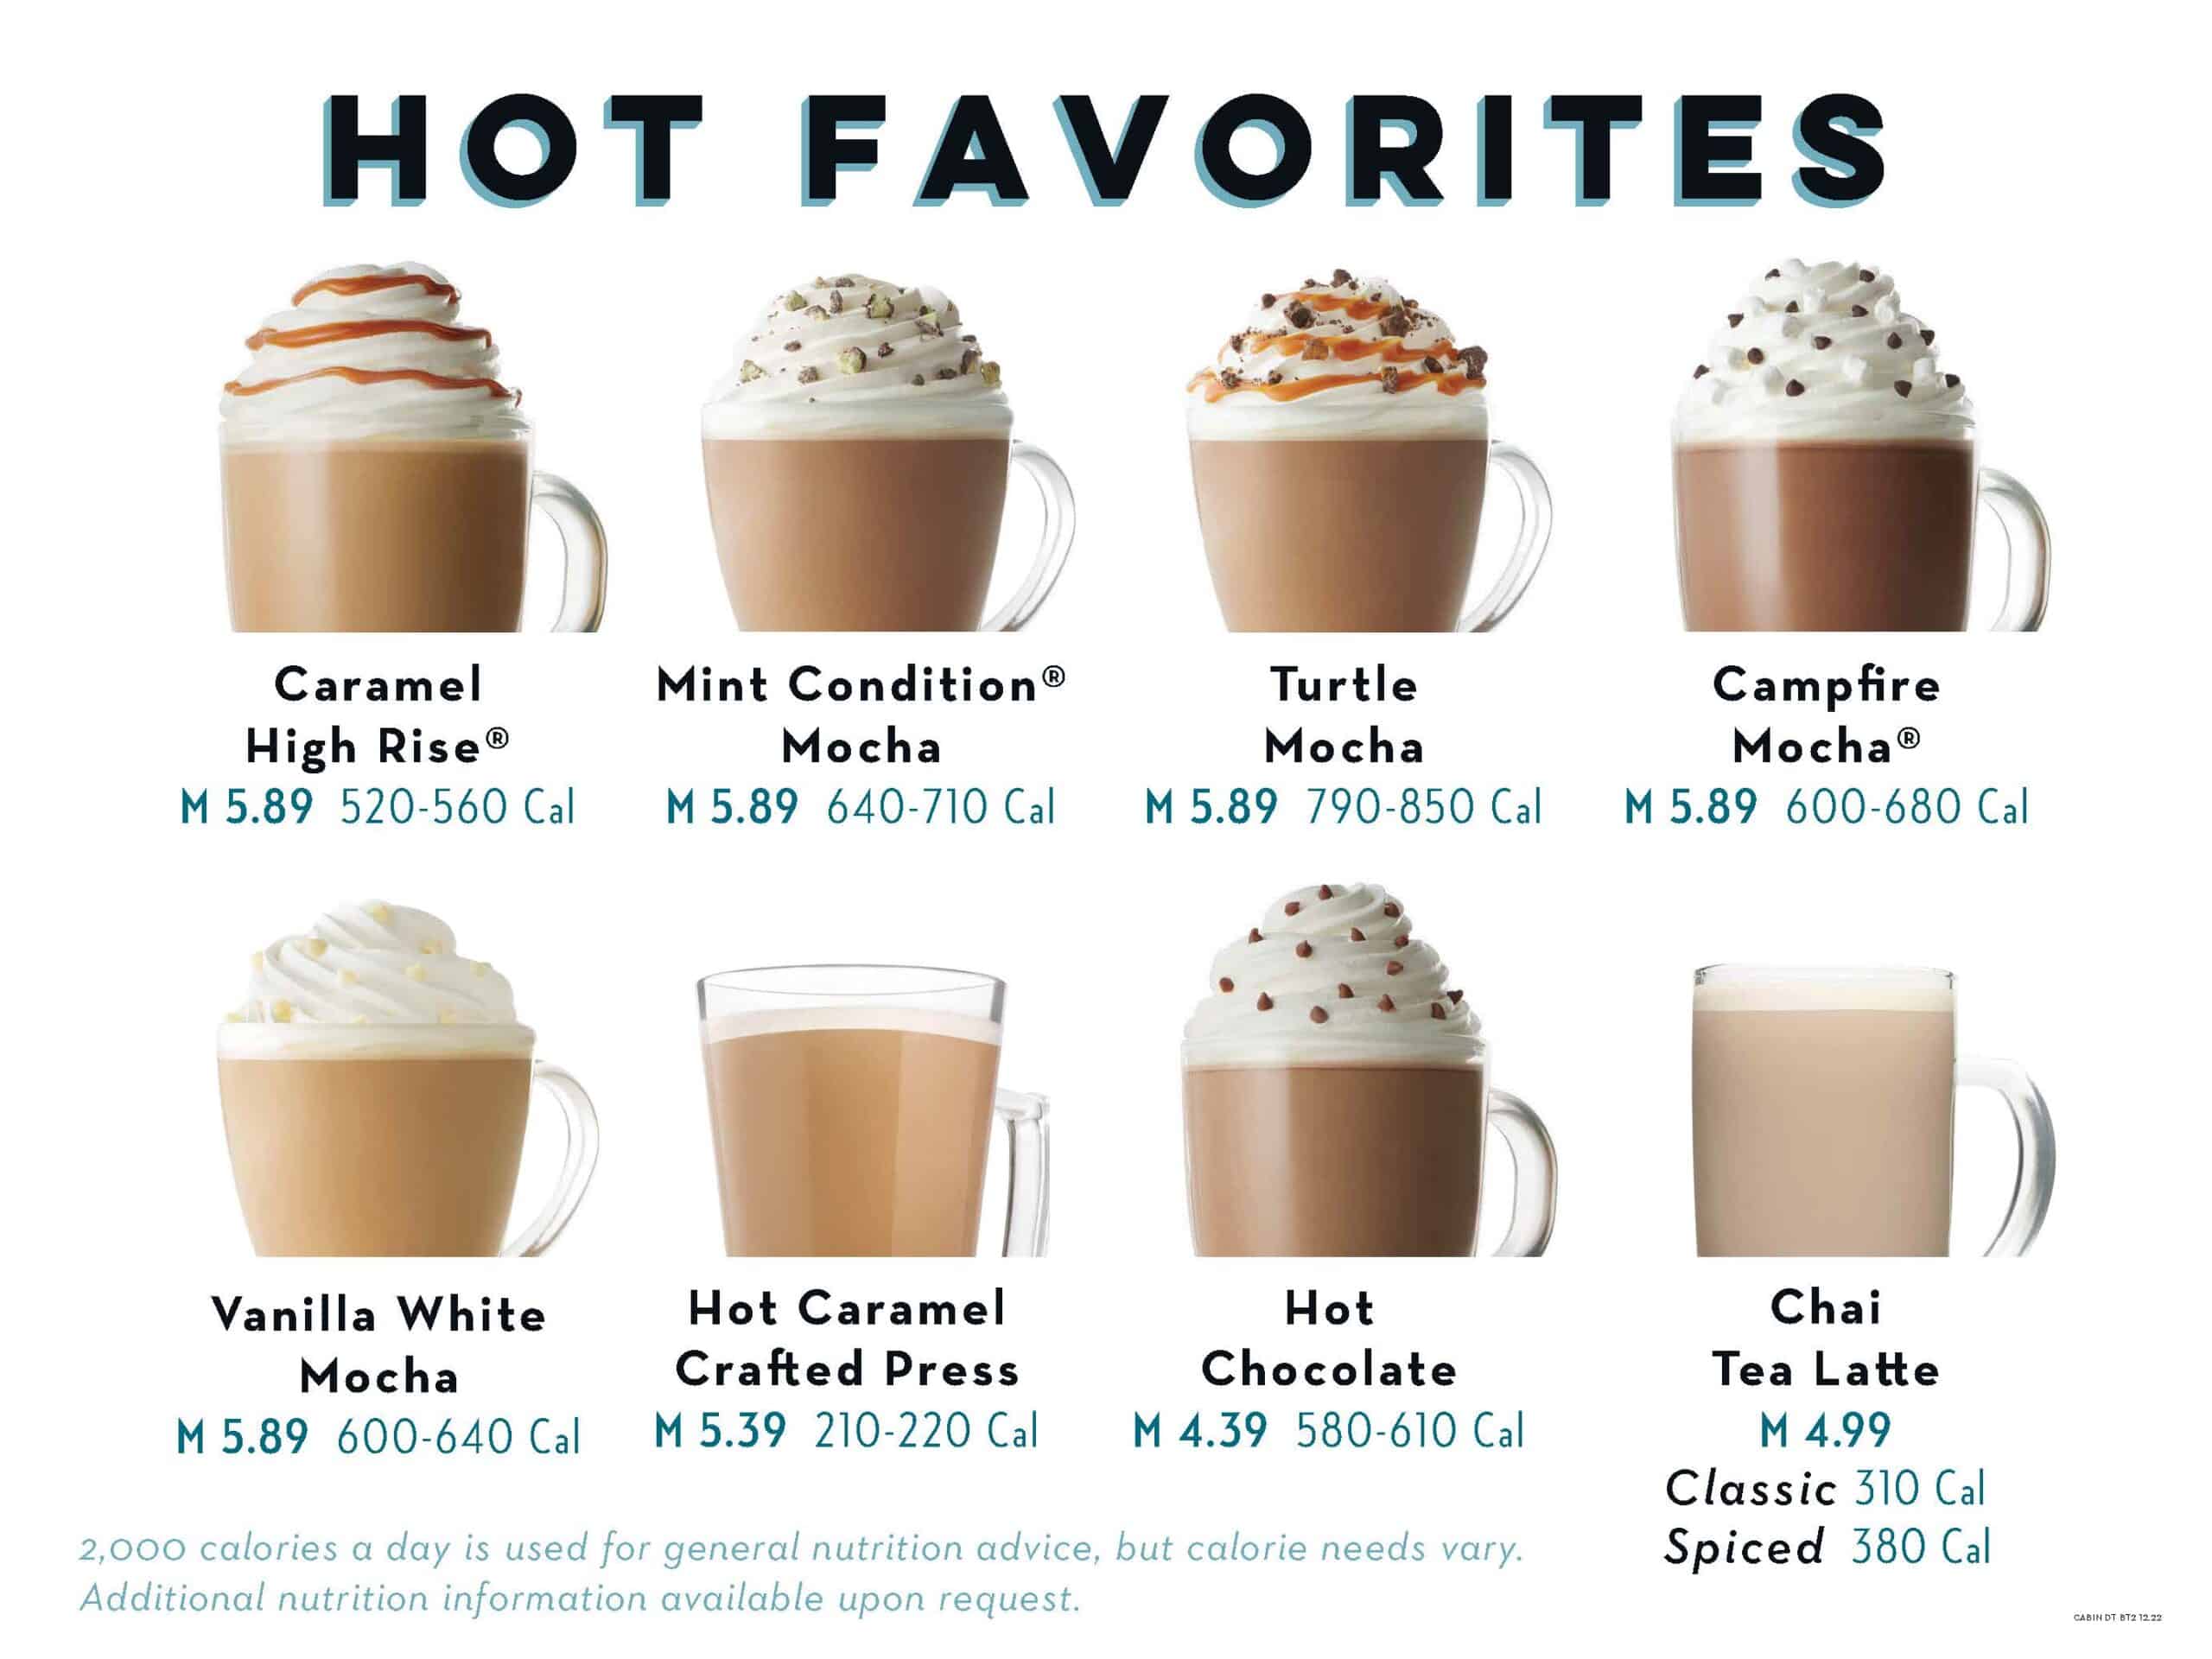 Hot favorites from Caribou Coffee